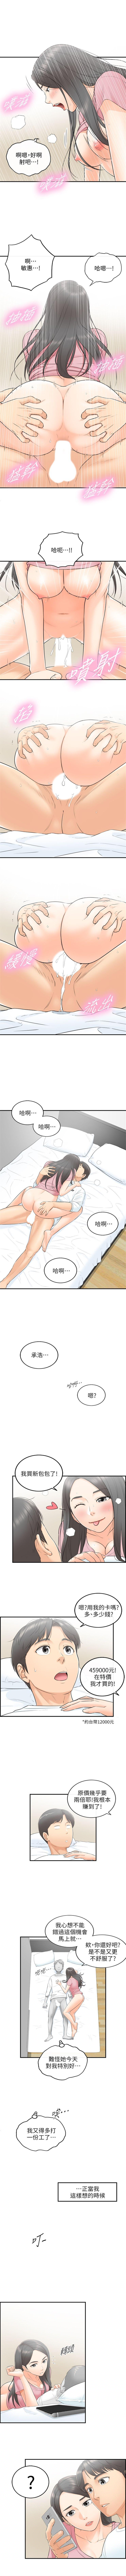 Sis 正妹小主管 1-54 官方中文（連載中） Ride - Page 7